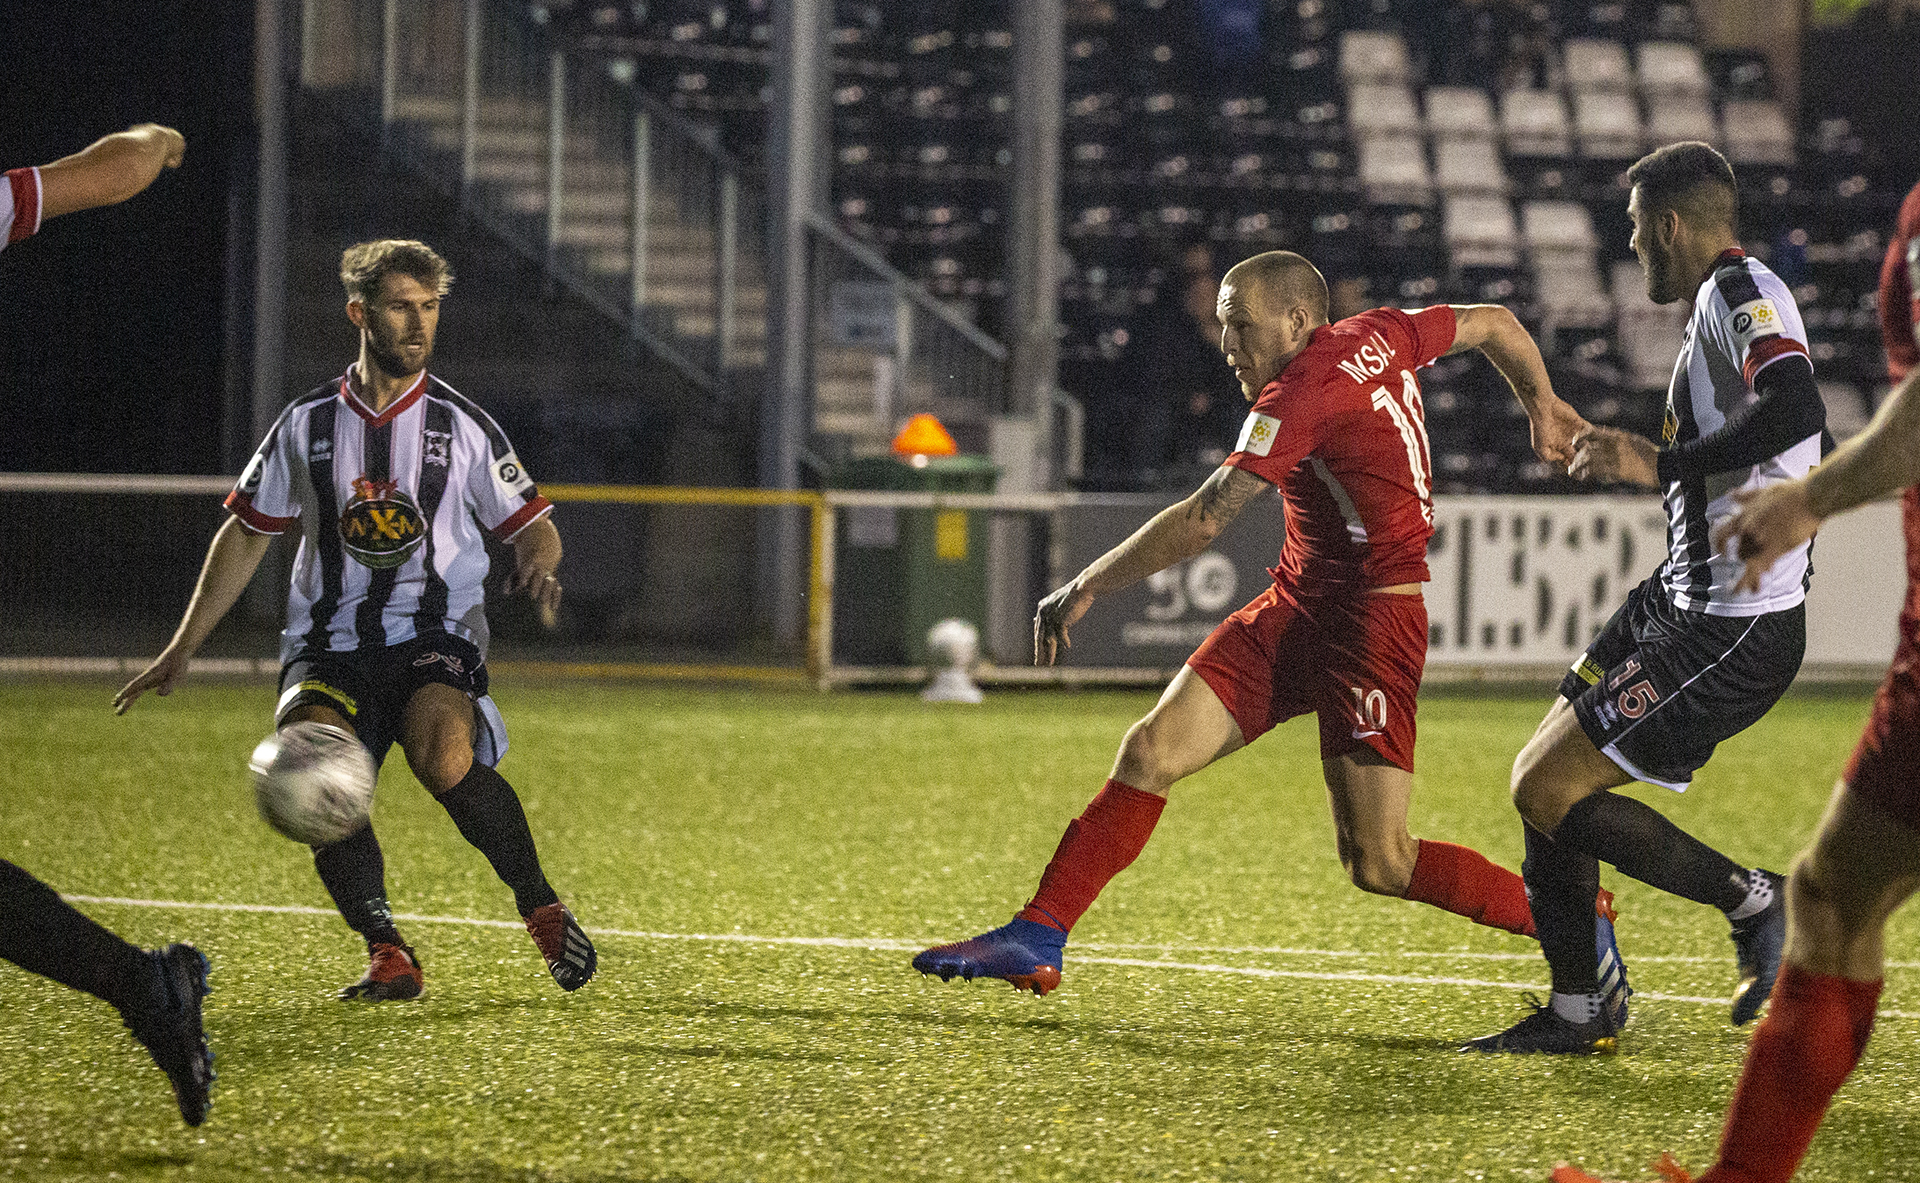 Jamie Insall scores his first goal of the evening | © NCM Media